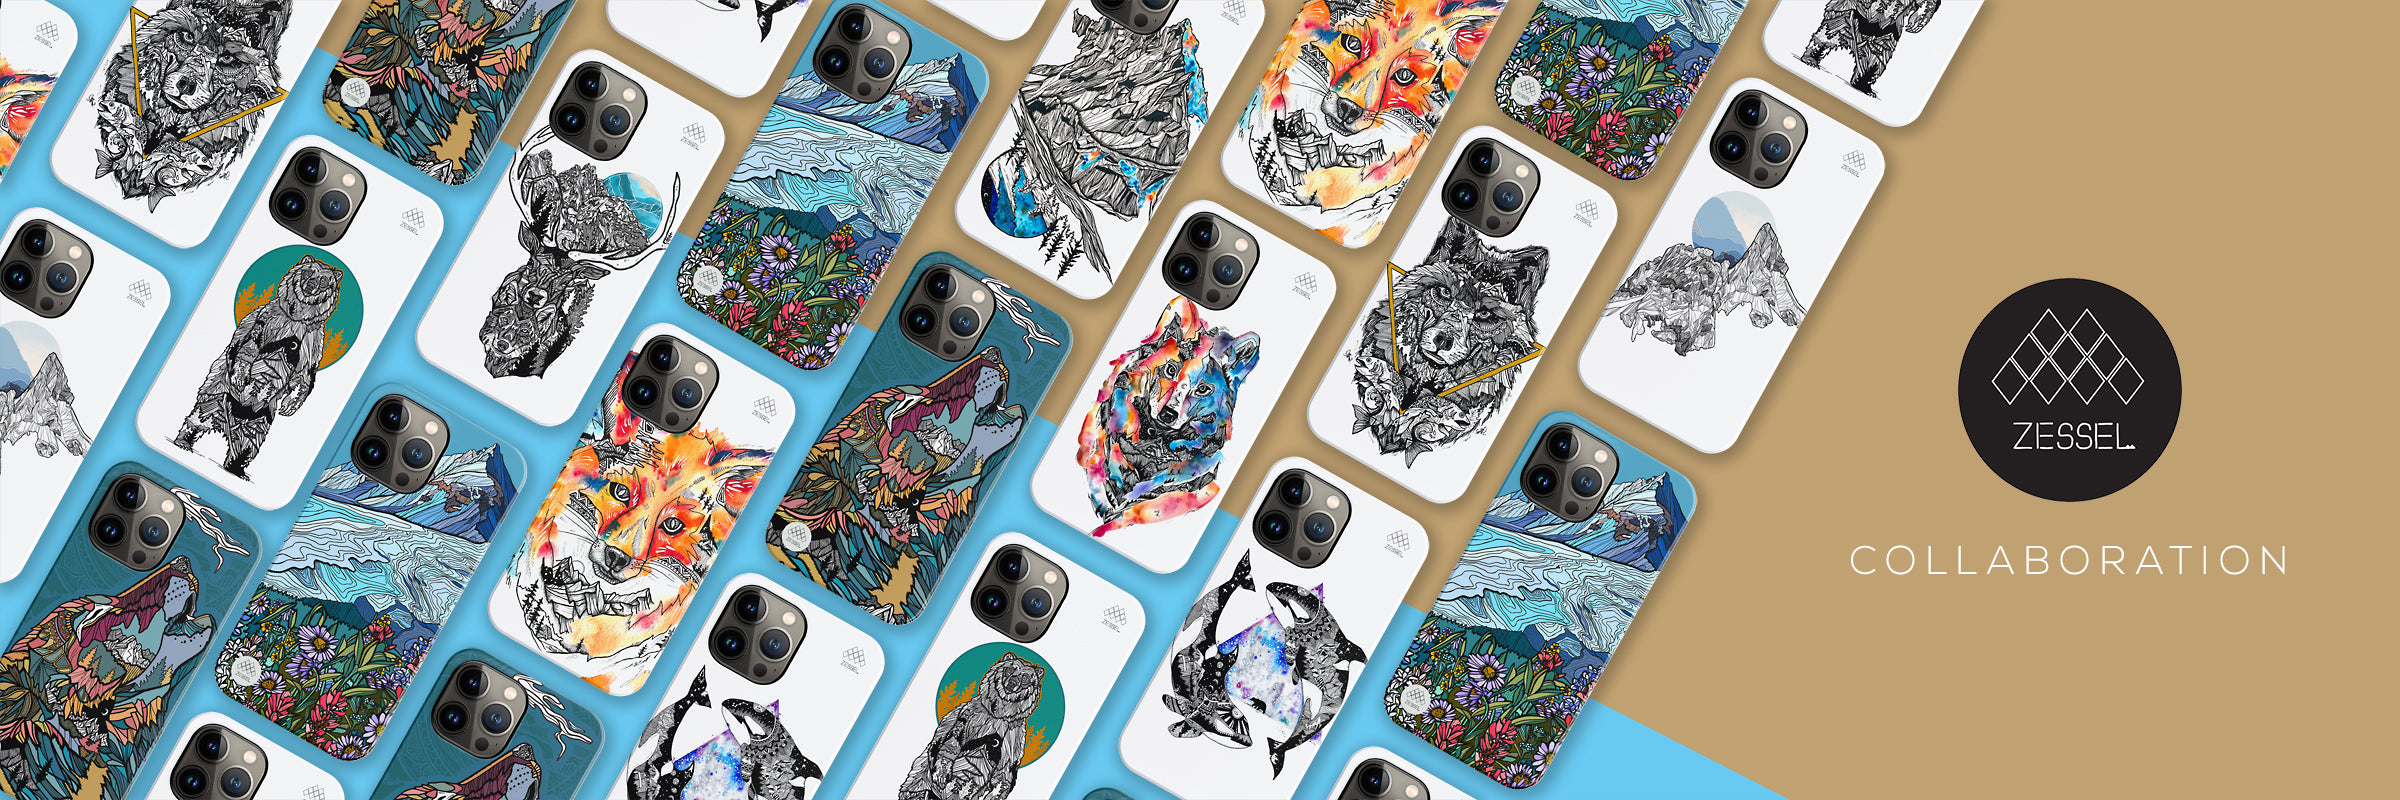 Collaboration Phone Cases: Kate Zessel